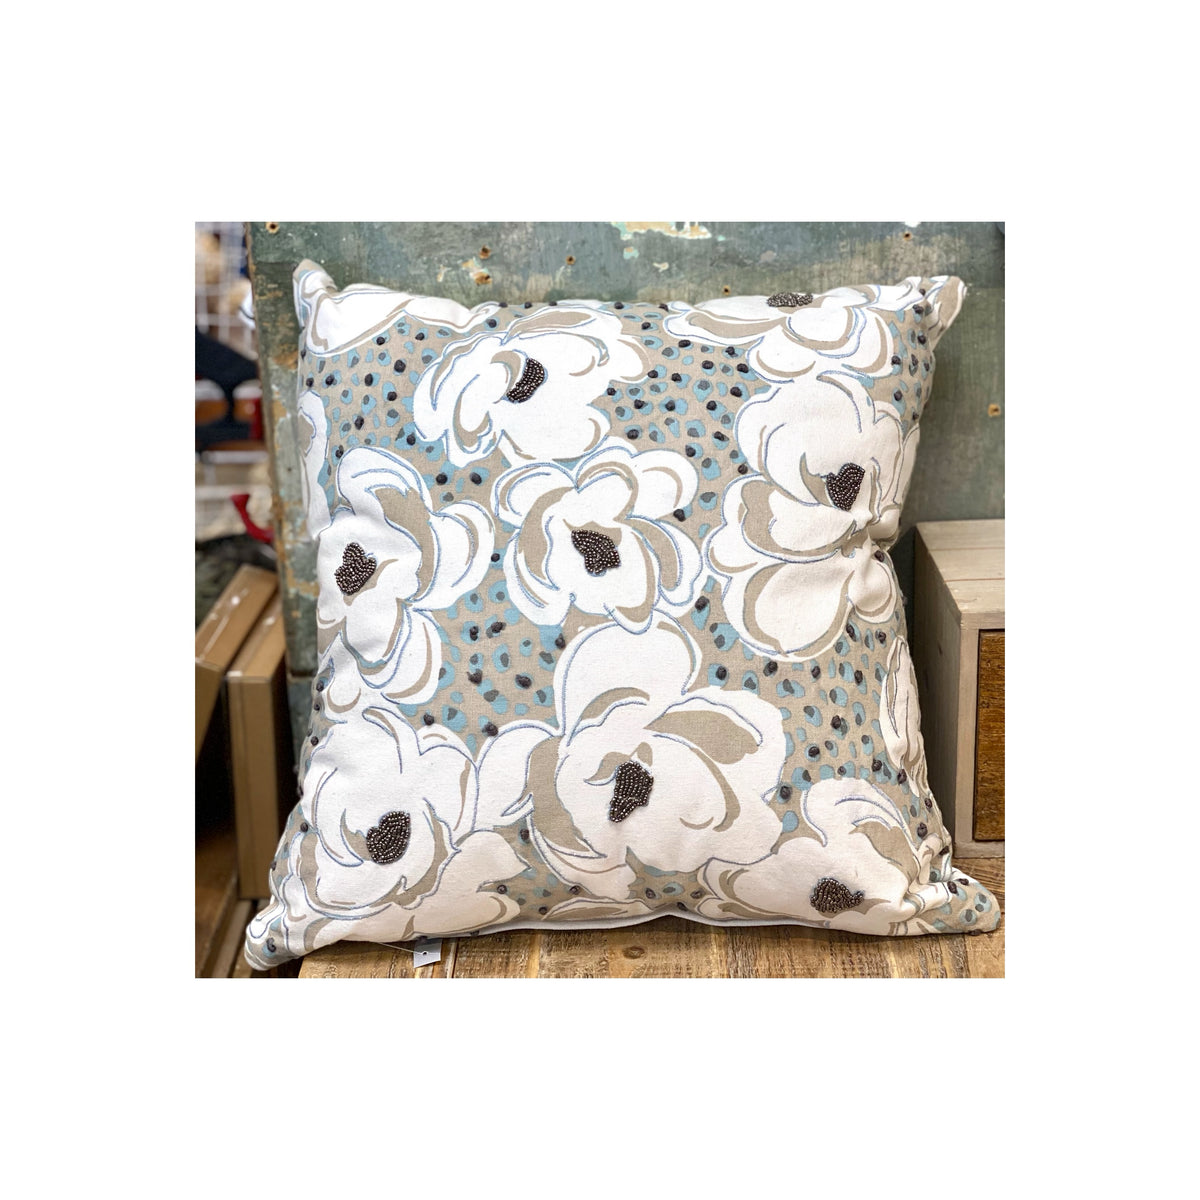 Pillow- Floral on Gray & Blue With beads